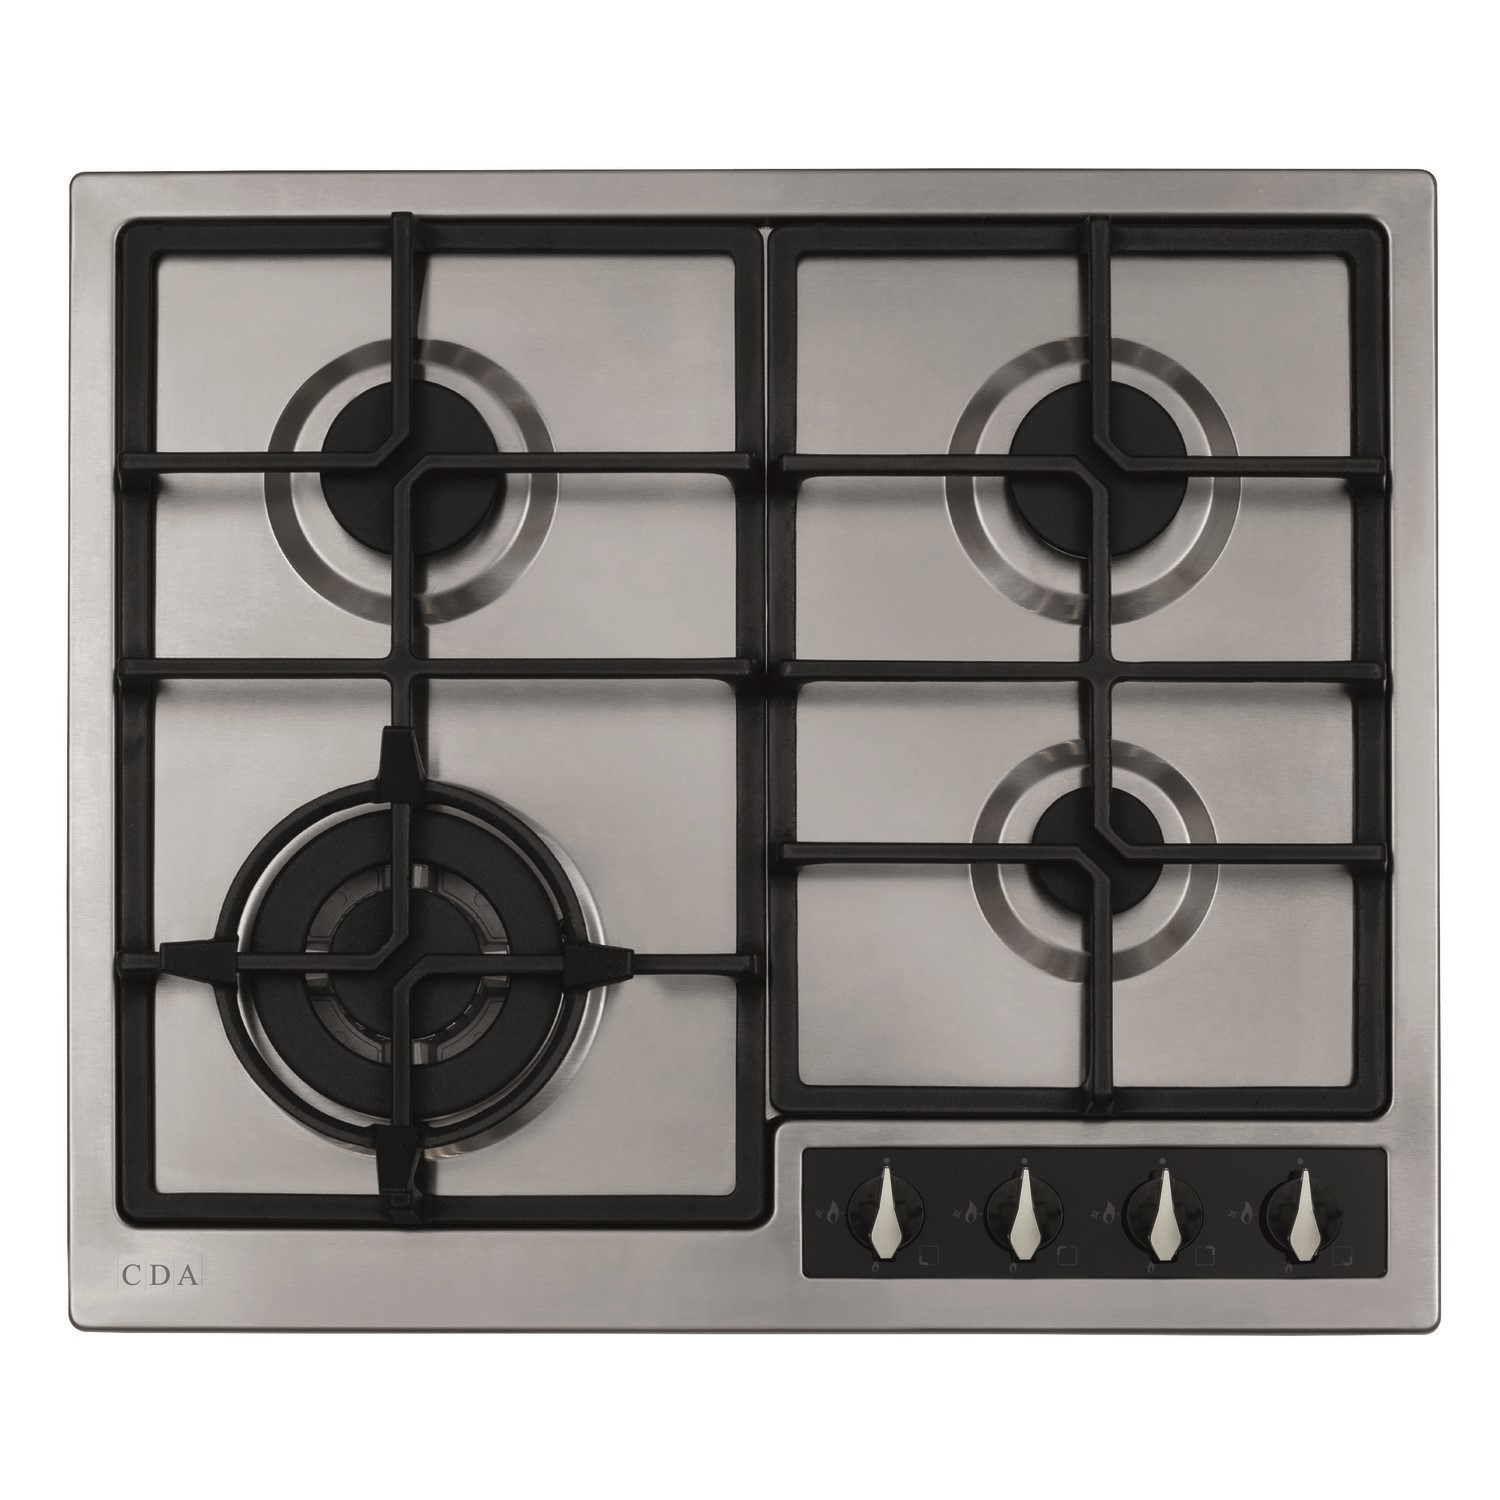 CDA 58cm 4 Burner Gas Hob with Wok Burner and Cast Iron Pan Stands - Stainless Steel